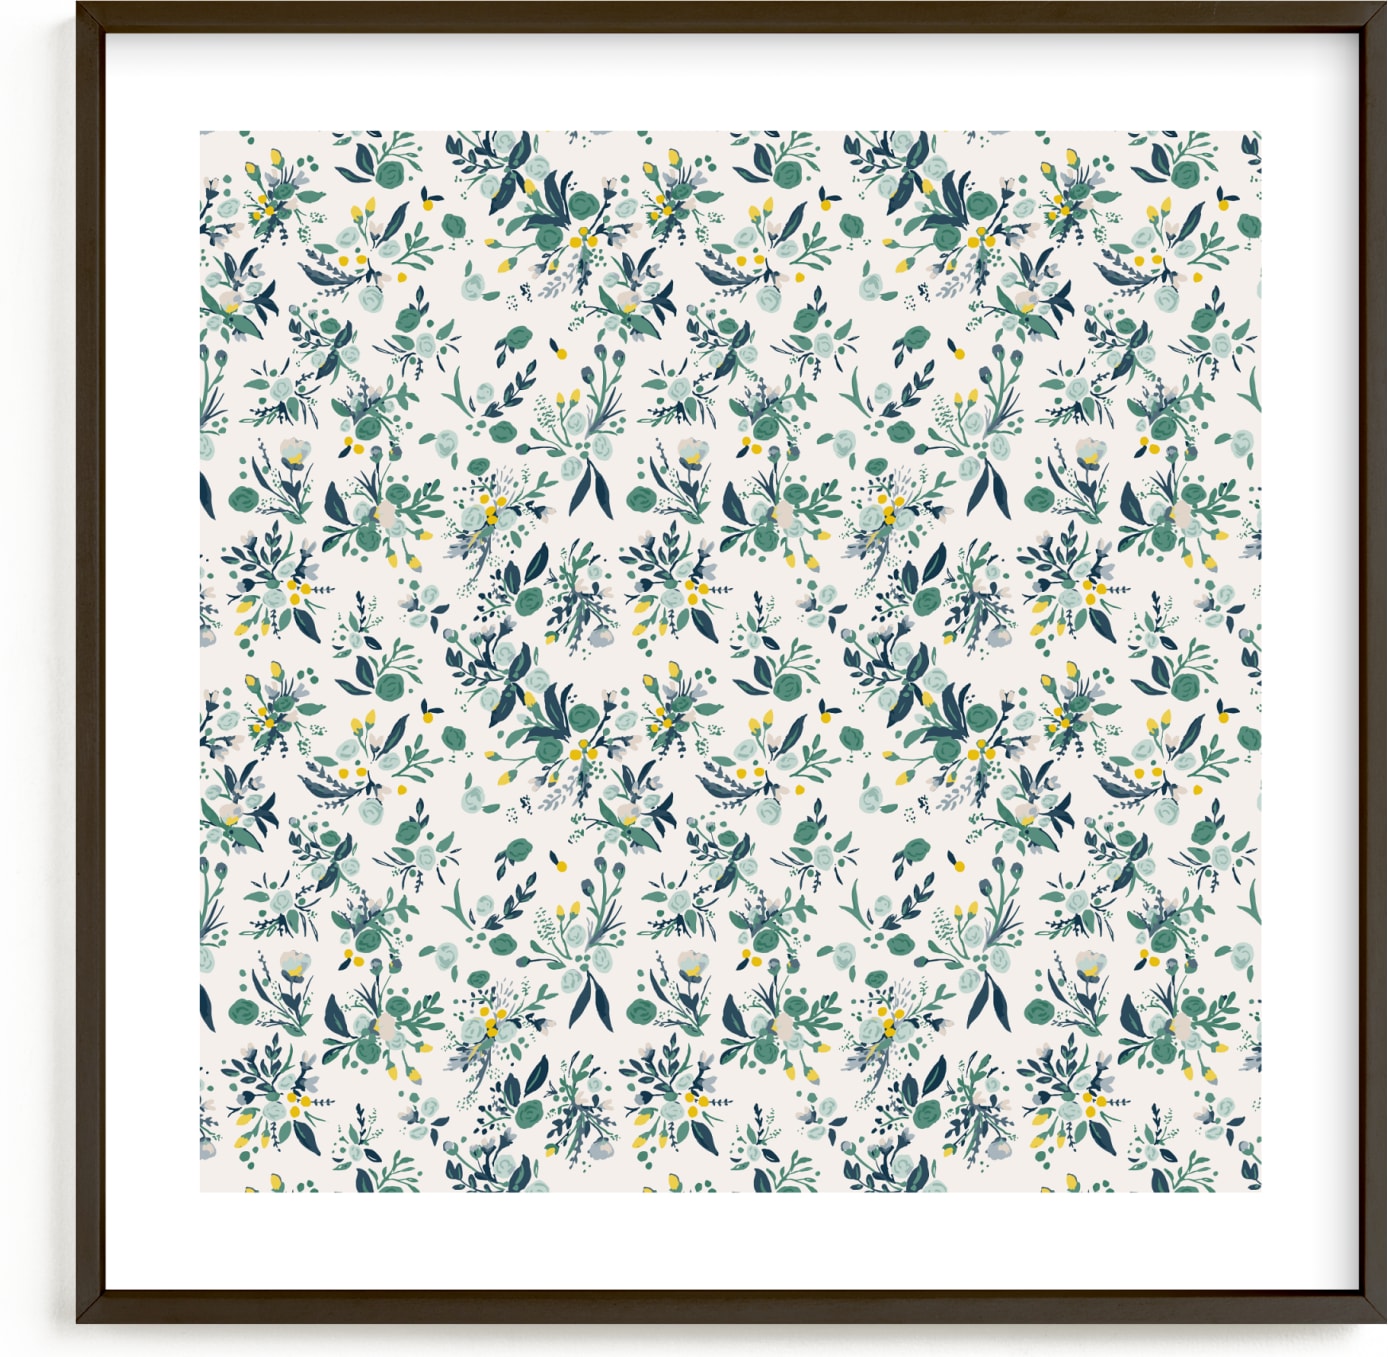 This is a blue, ivory, green kids wall art by Anna Stout-Tuckwiller called Gardens.